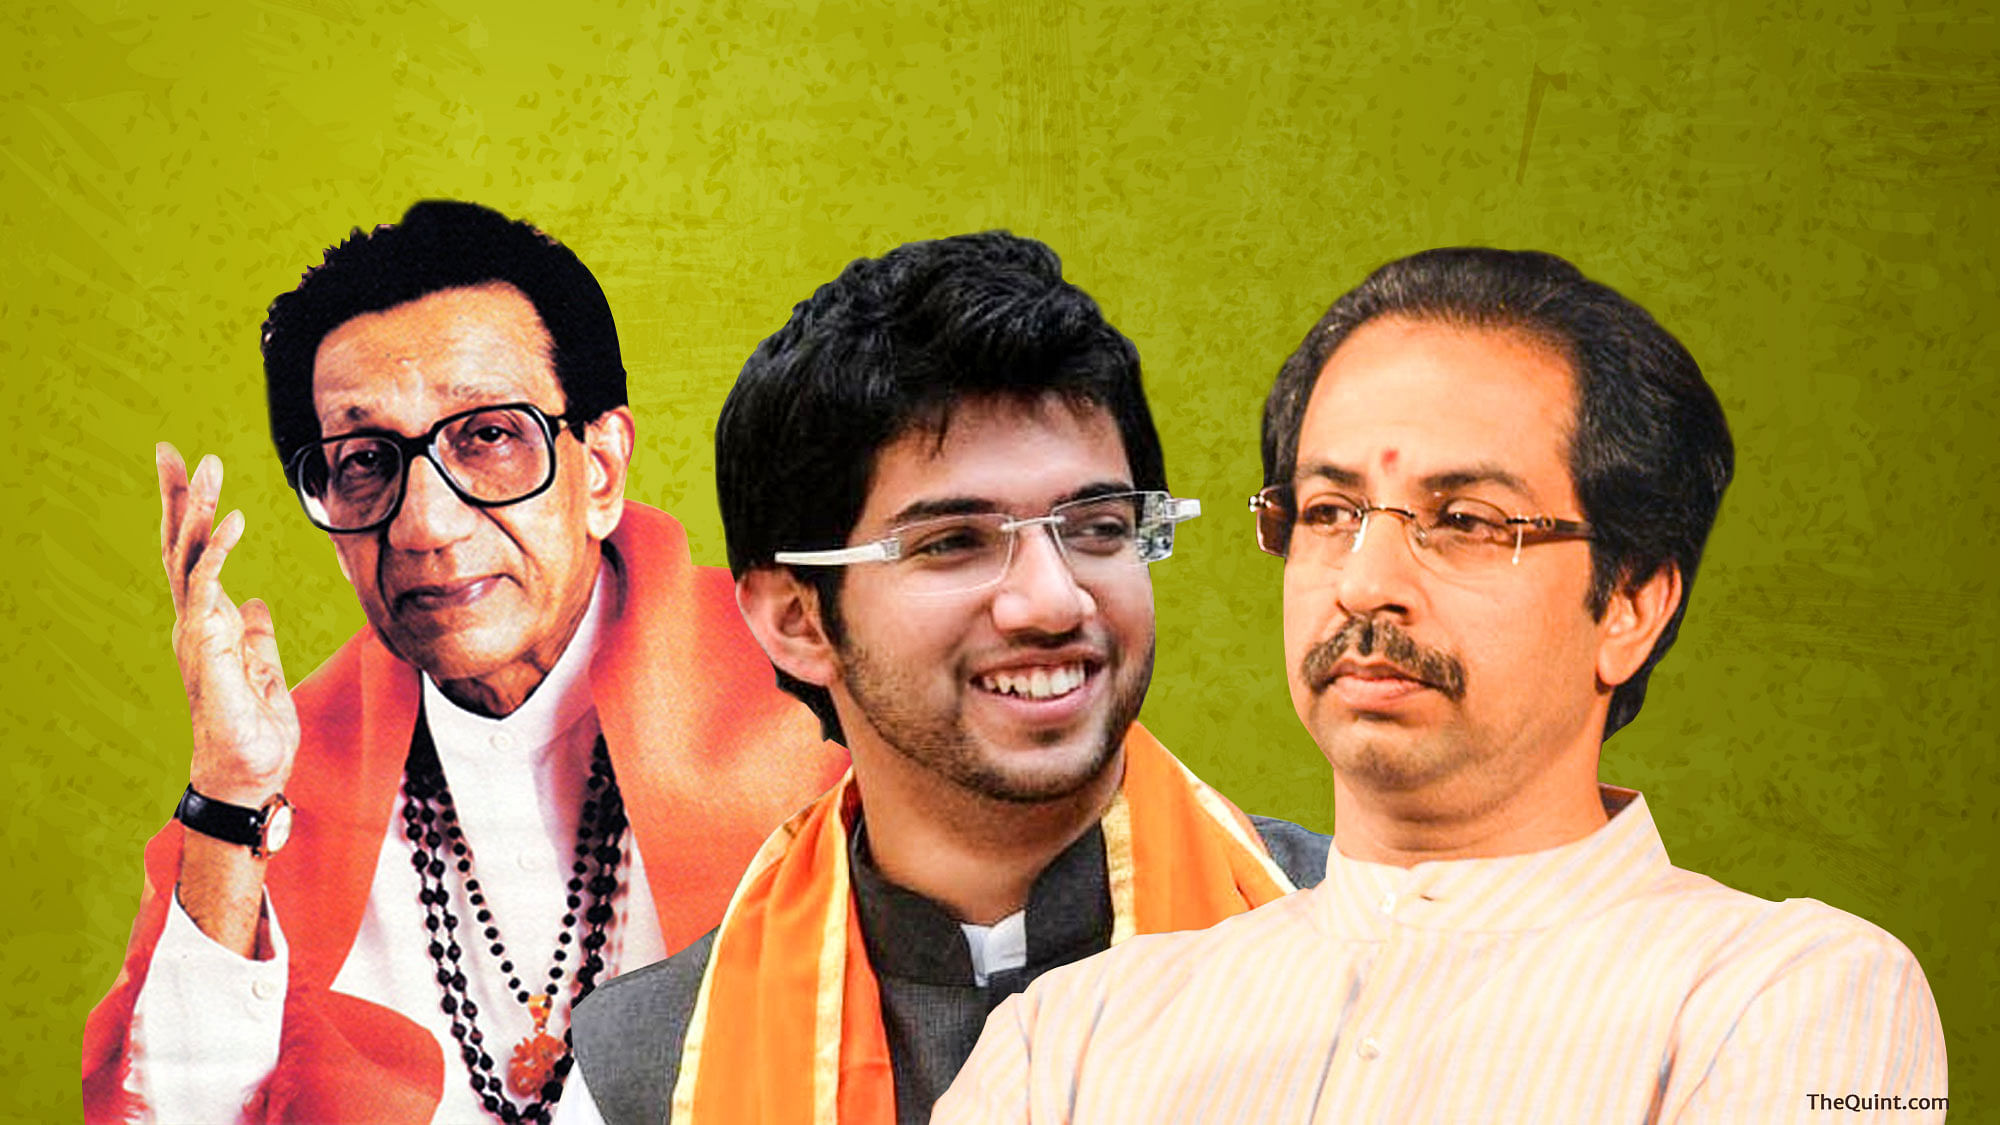 The Shiv Sena was formed on 16 June 1966. 